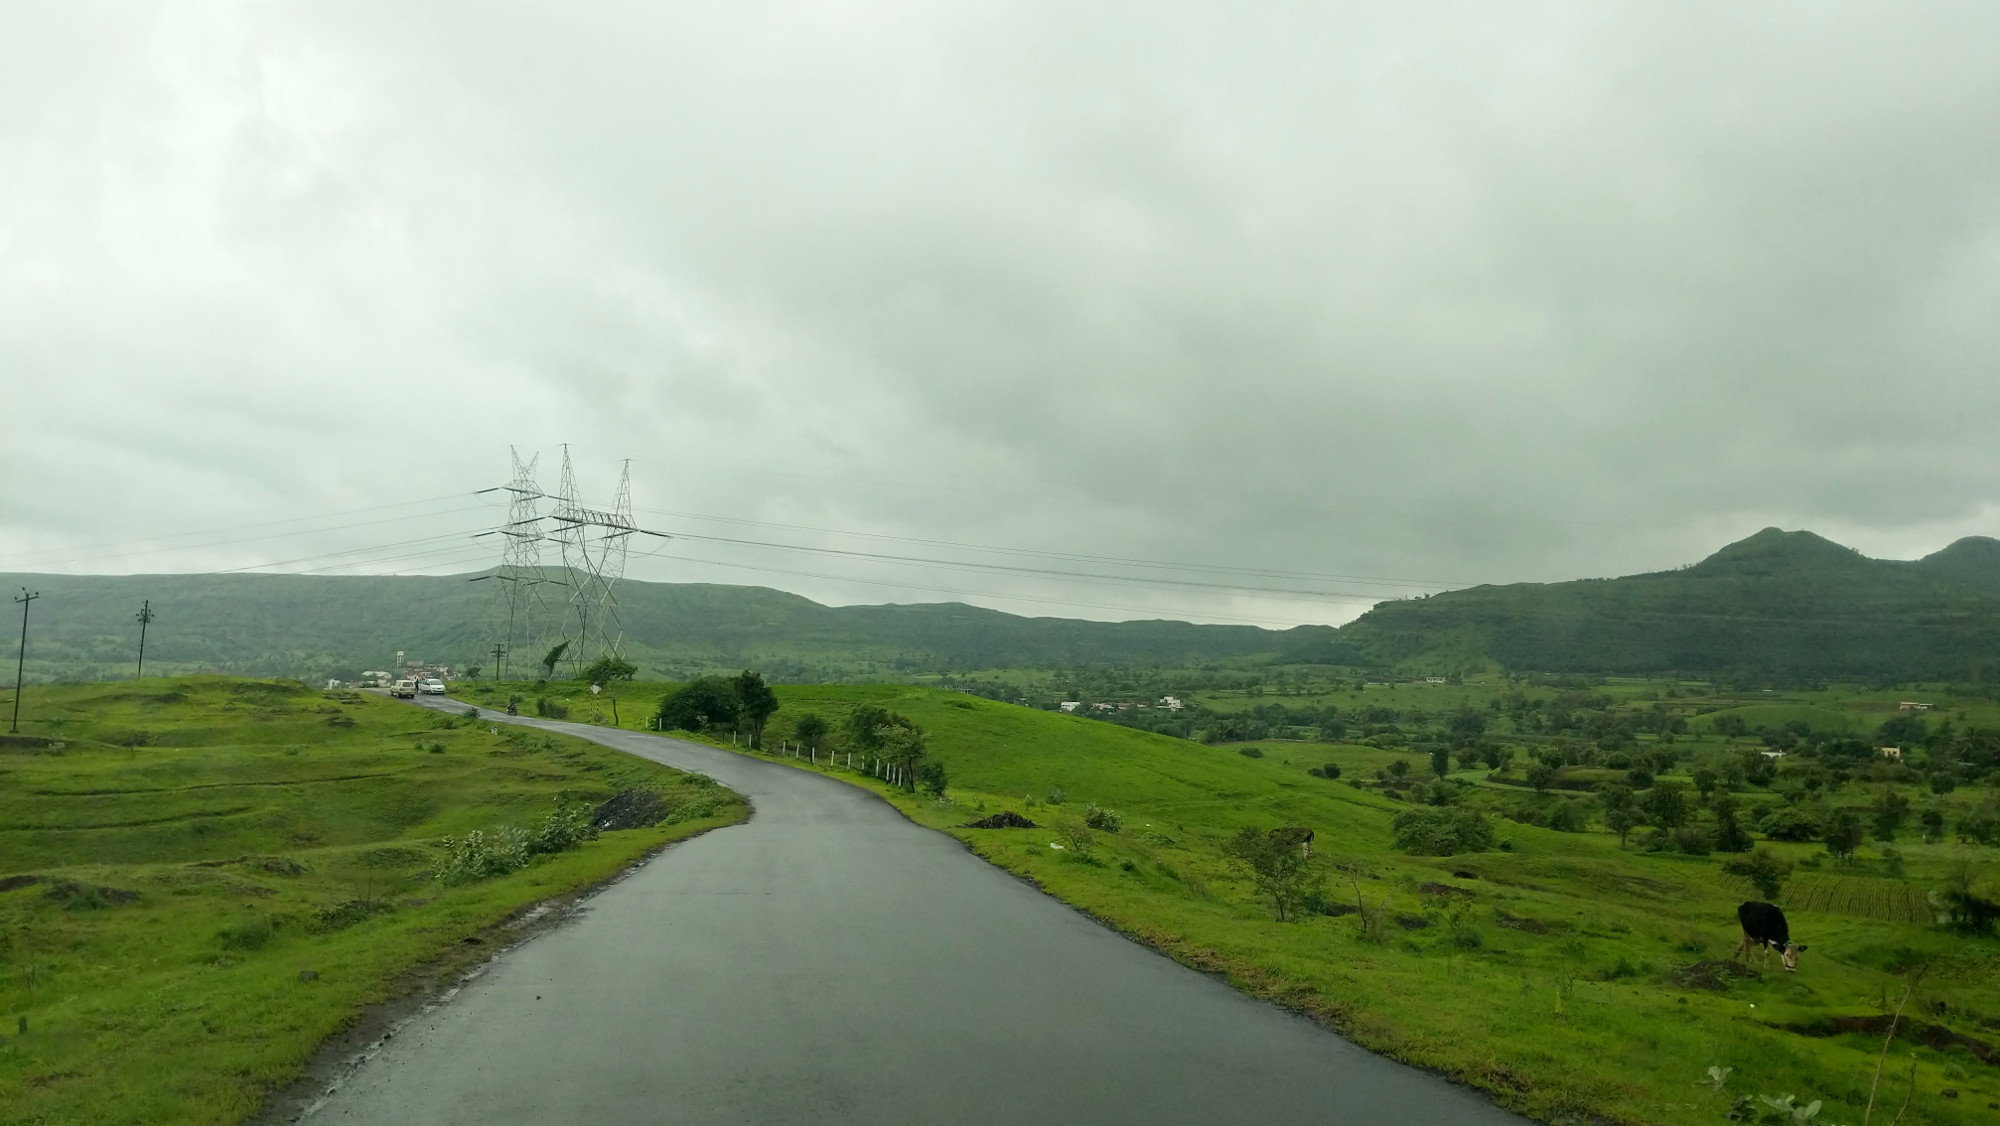 A Super Scenic Road Trip To Veer Dam Places Near Pune And Mumbai